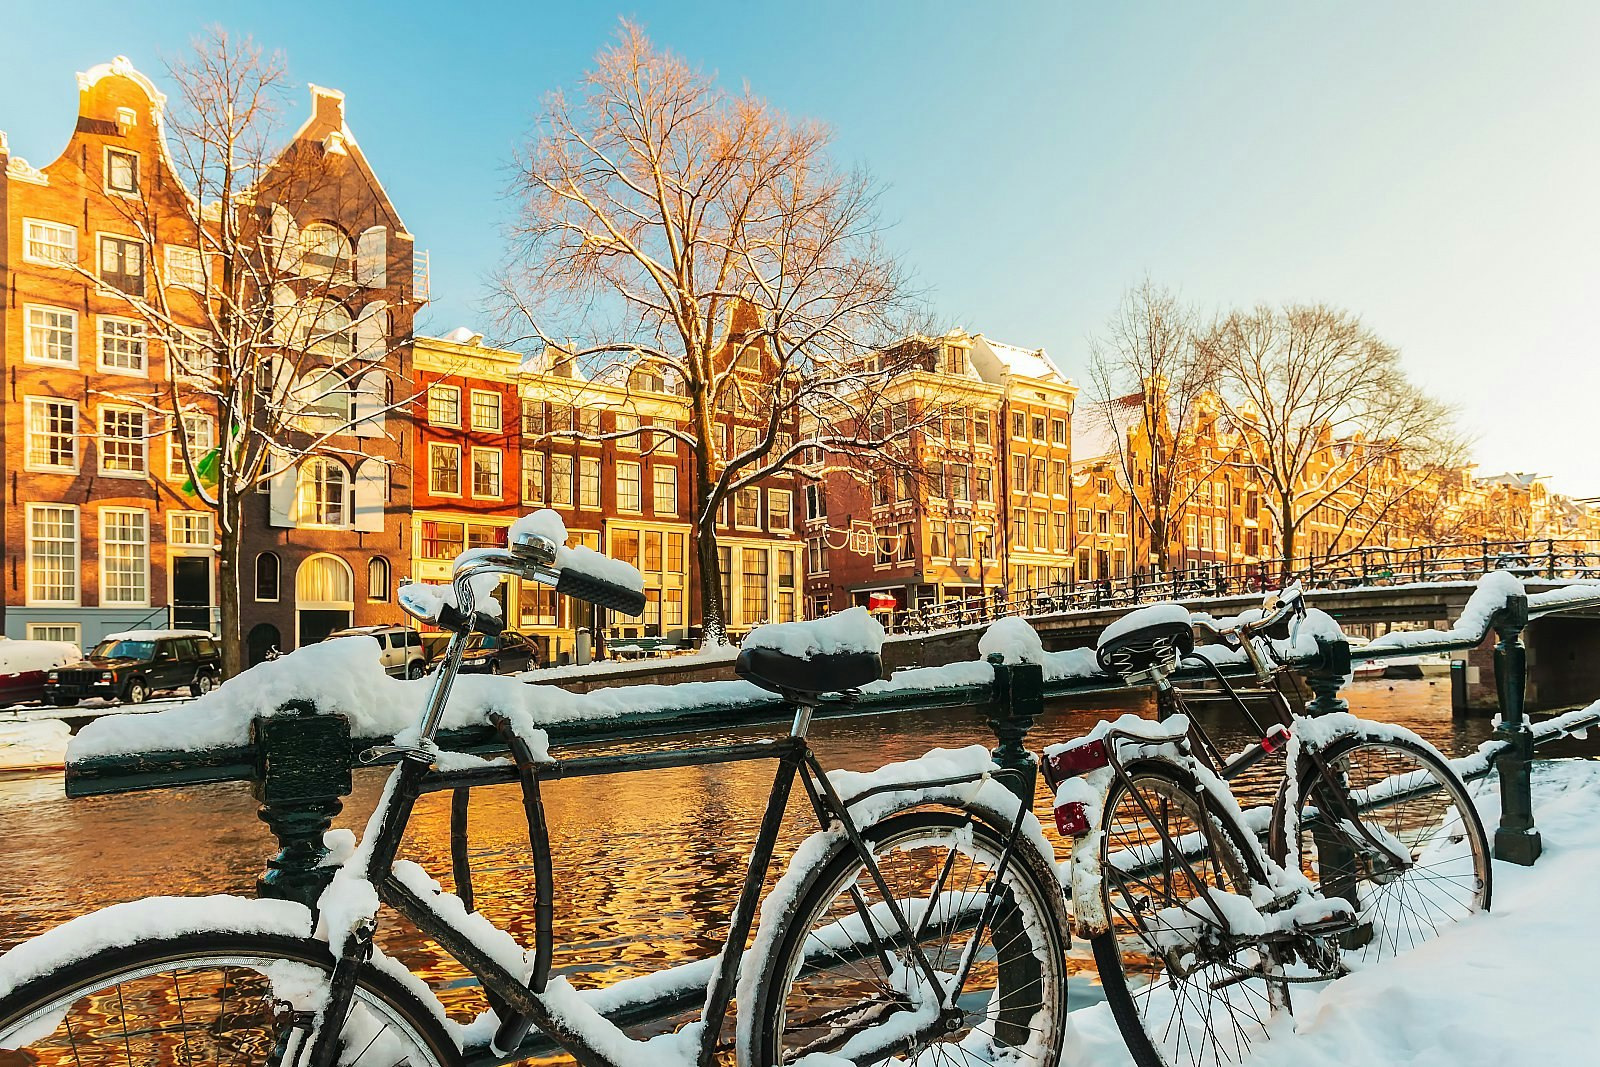 Snow-covered bicycles resting on a railing with an Amsterdam canal behind it; on the other side of the canal are gabled townhouses. Amsterdam winter